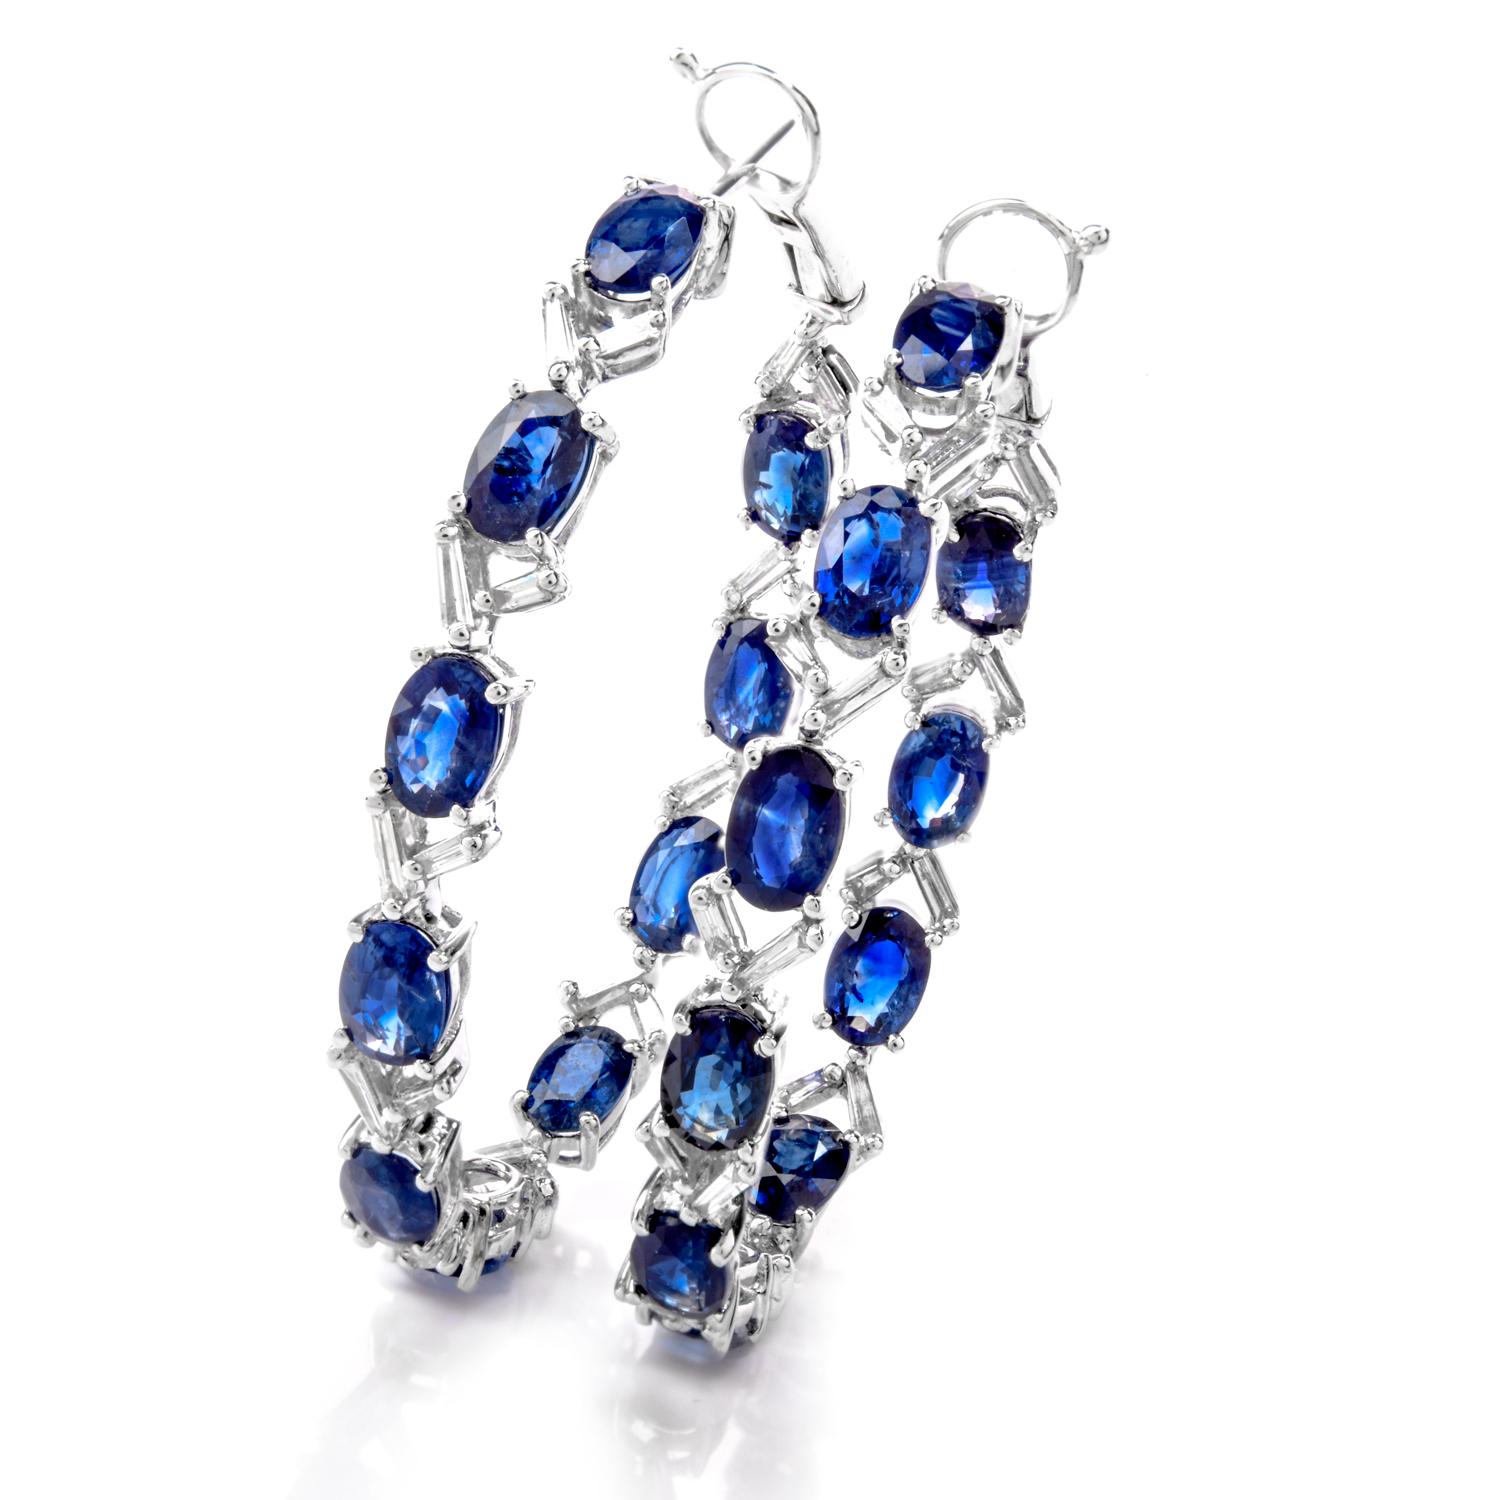 Boasting in Color, these Diamond and Sapphire Hoop Earrings were inspired in 

an Inside Outside design and crafted in 18K white gold.

While Baguette cut Diamonds offer the sparkle, vibrant oval shaped and transparent

Blue Sapphire offer the